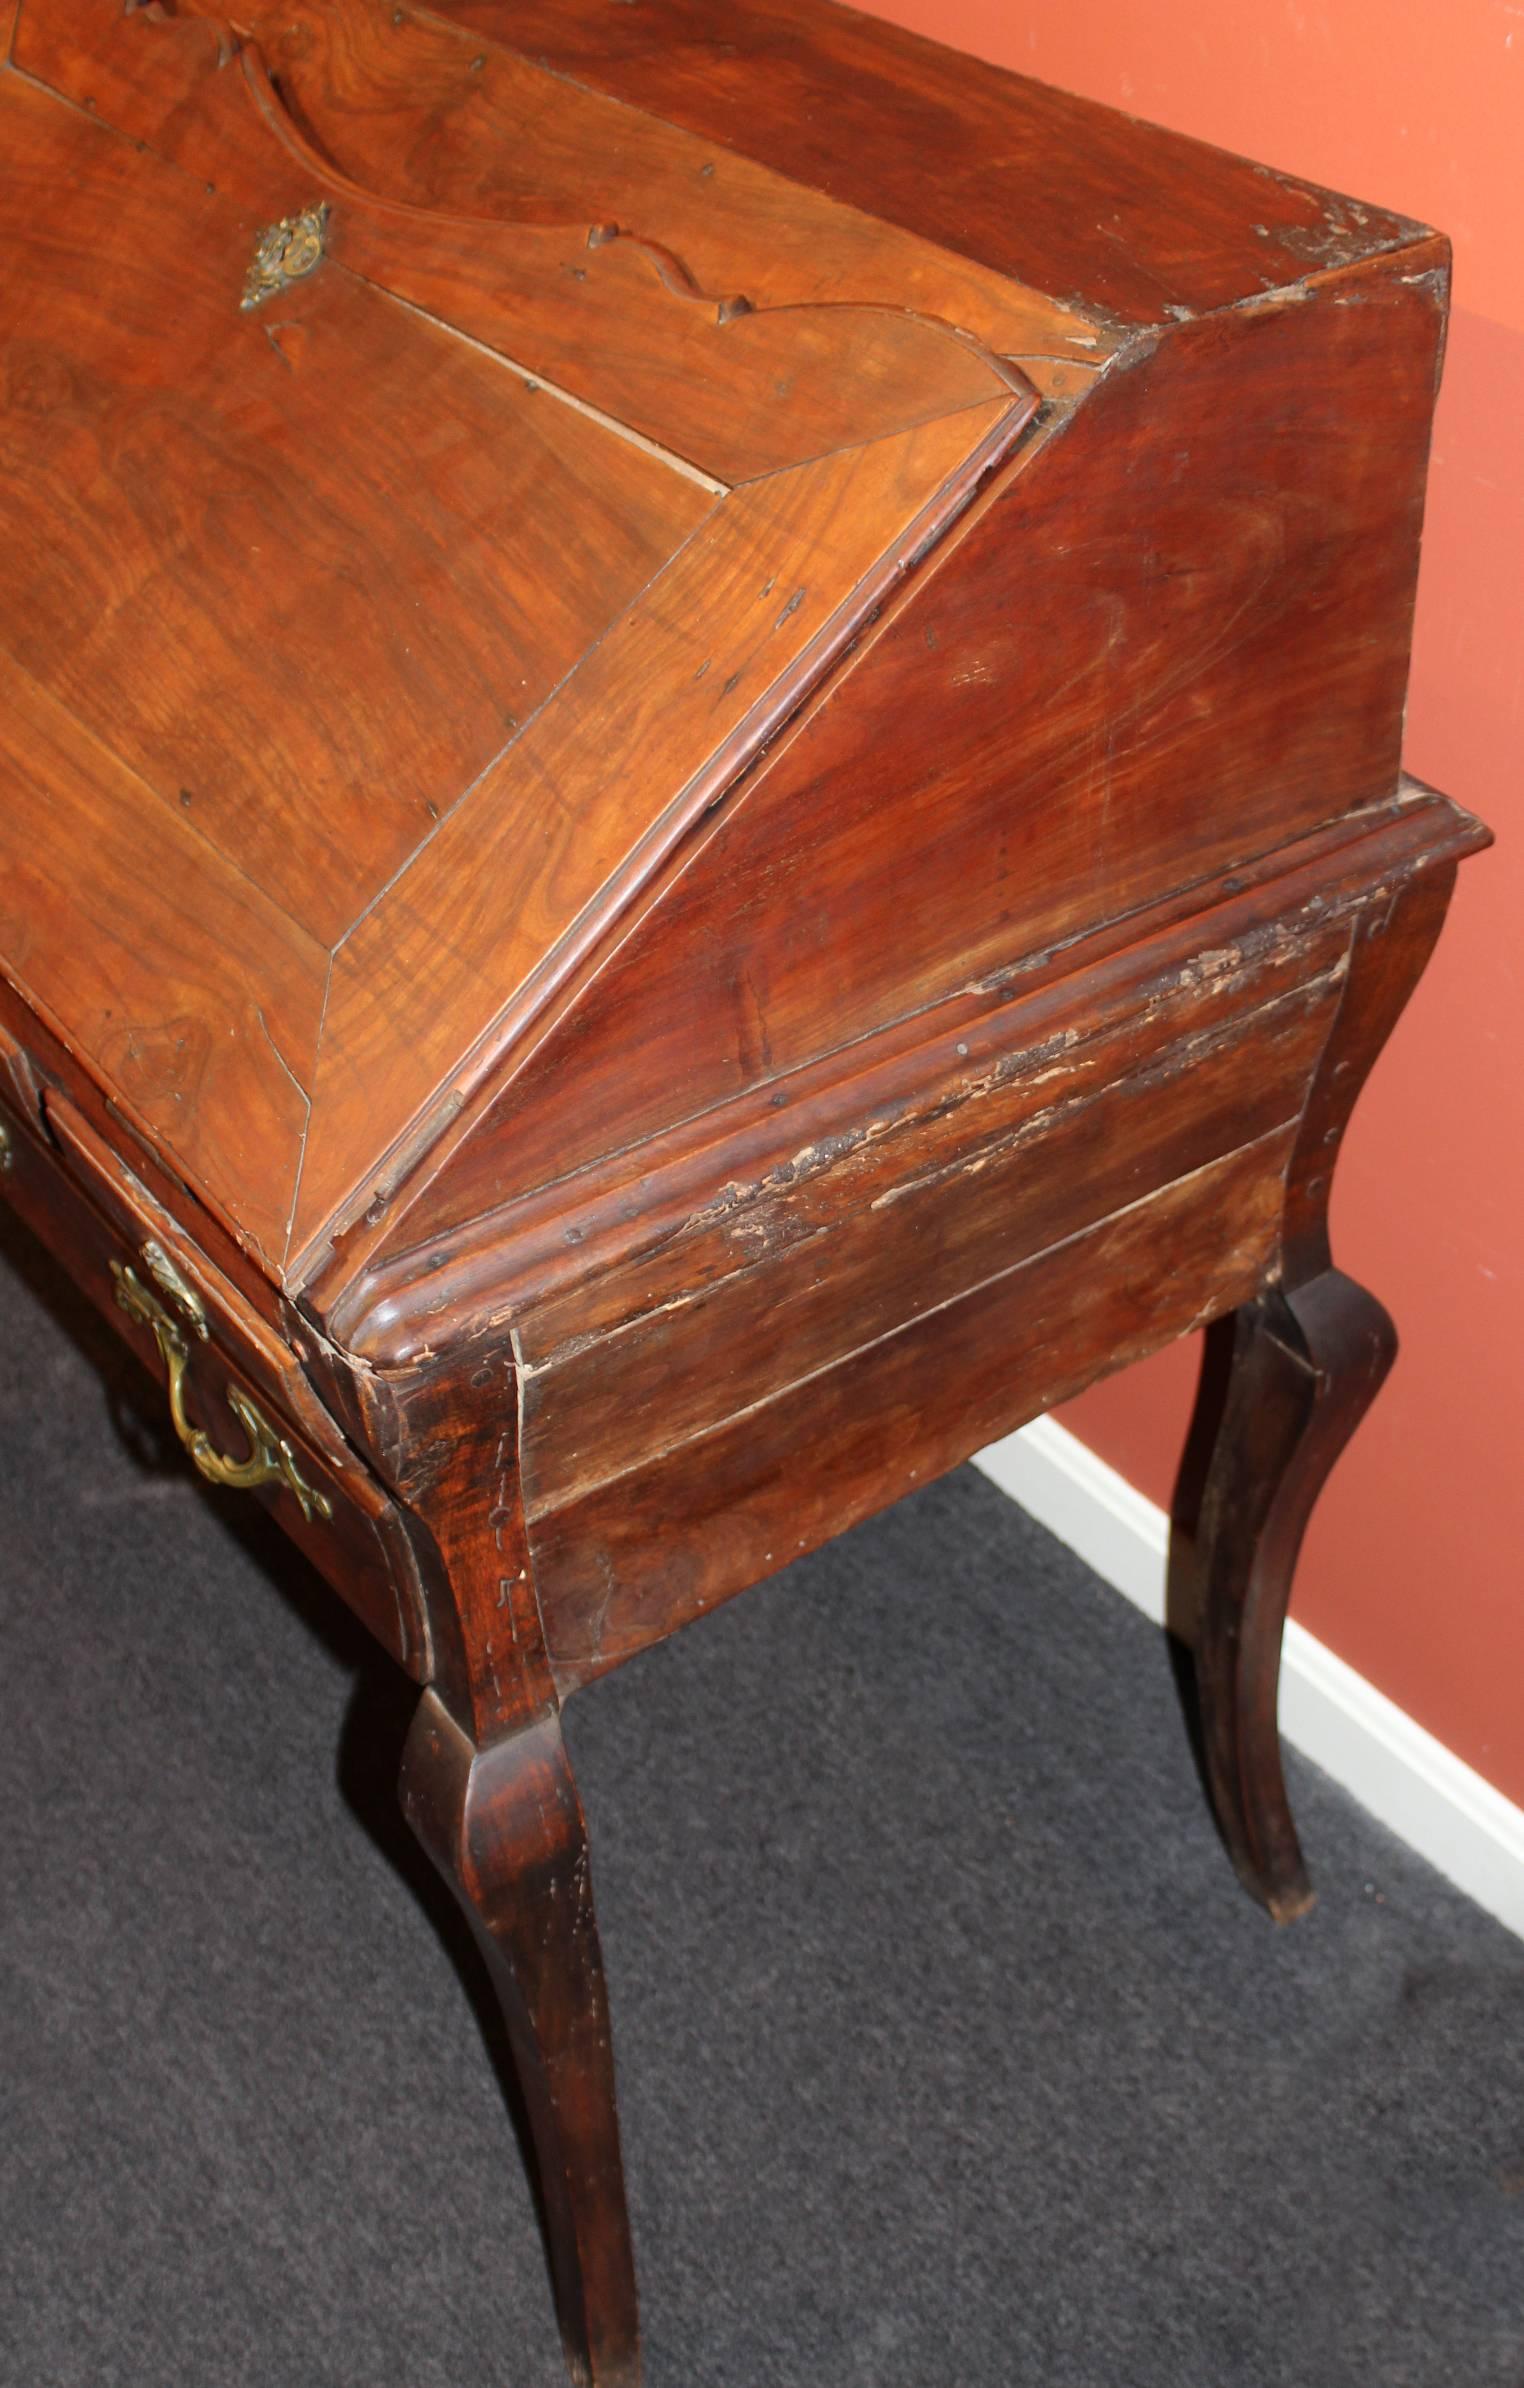 An 18th century Italian walnut ladies desk with gallery interior consisting of seven drawers and four compartments, including a fifth secret center compartment under the writing surface. The lower case has two fitted short drawers also used to